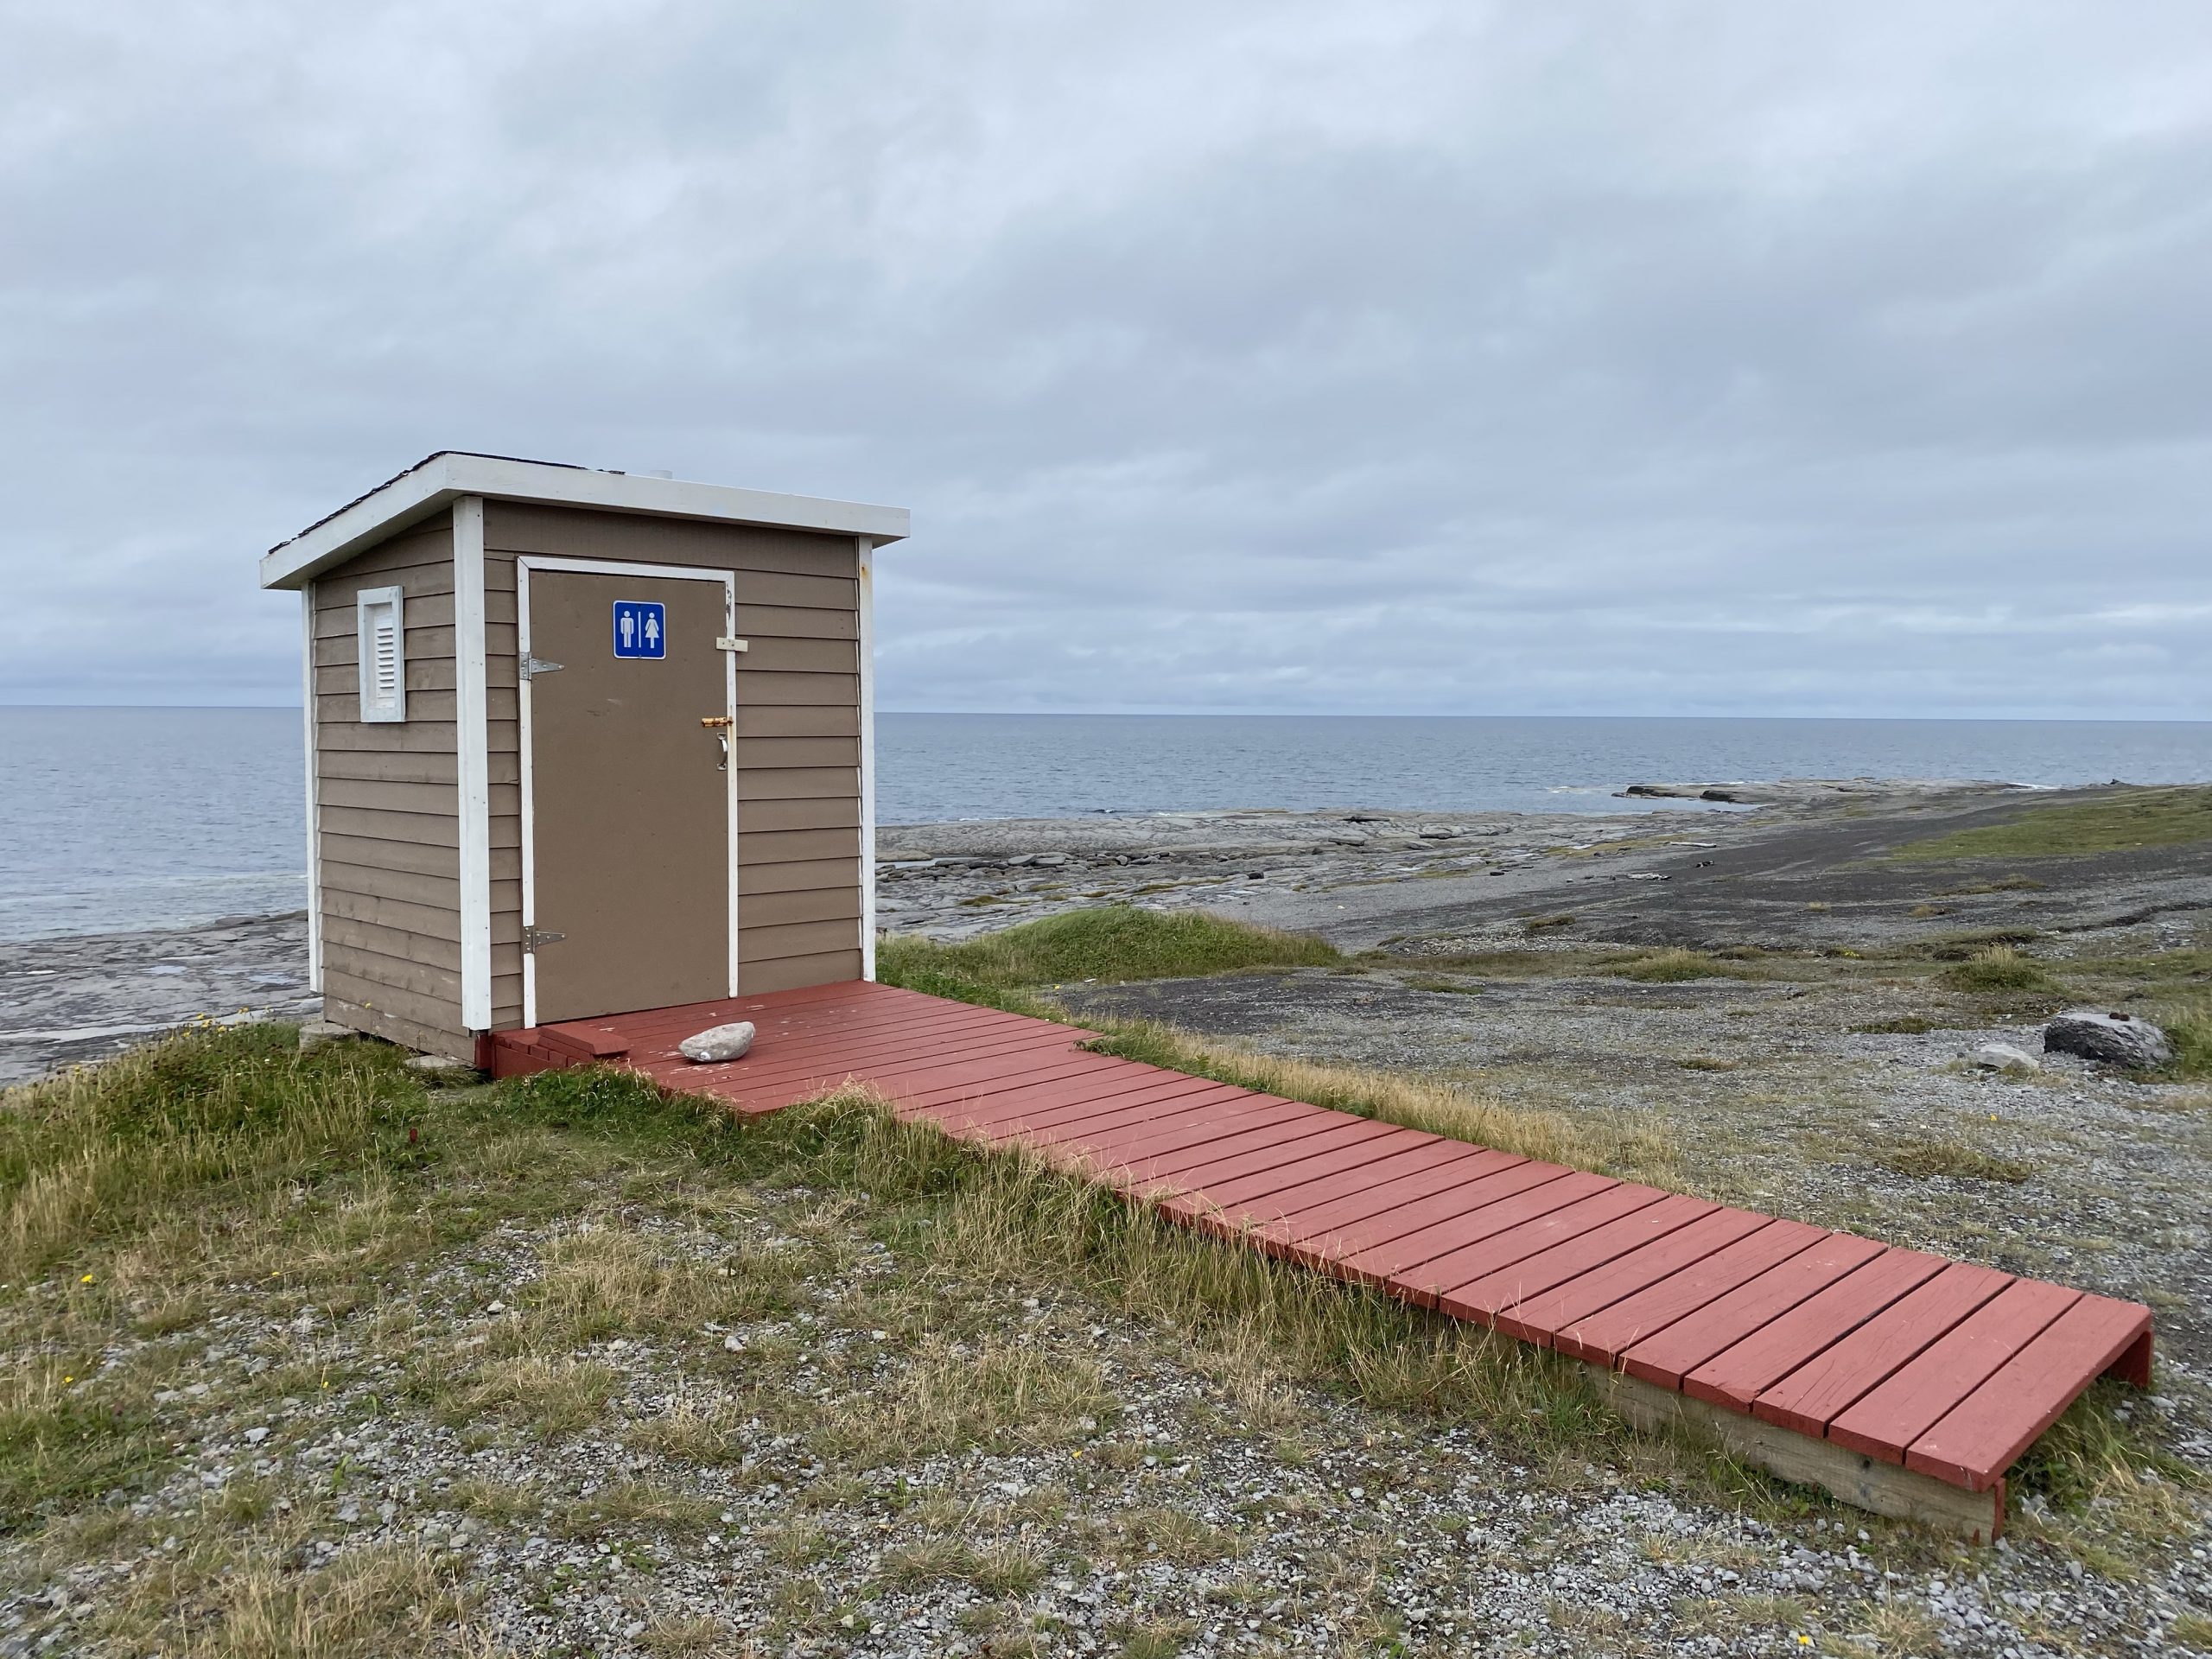 This absolutely forlorn restroom is at Point Richie near Port Choix, Newfoundland.